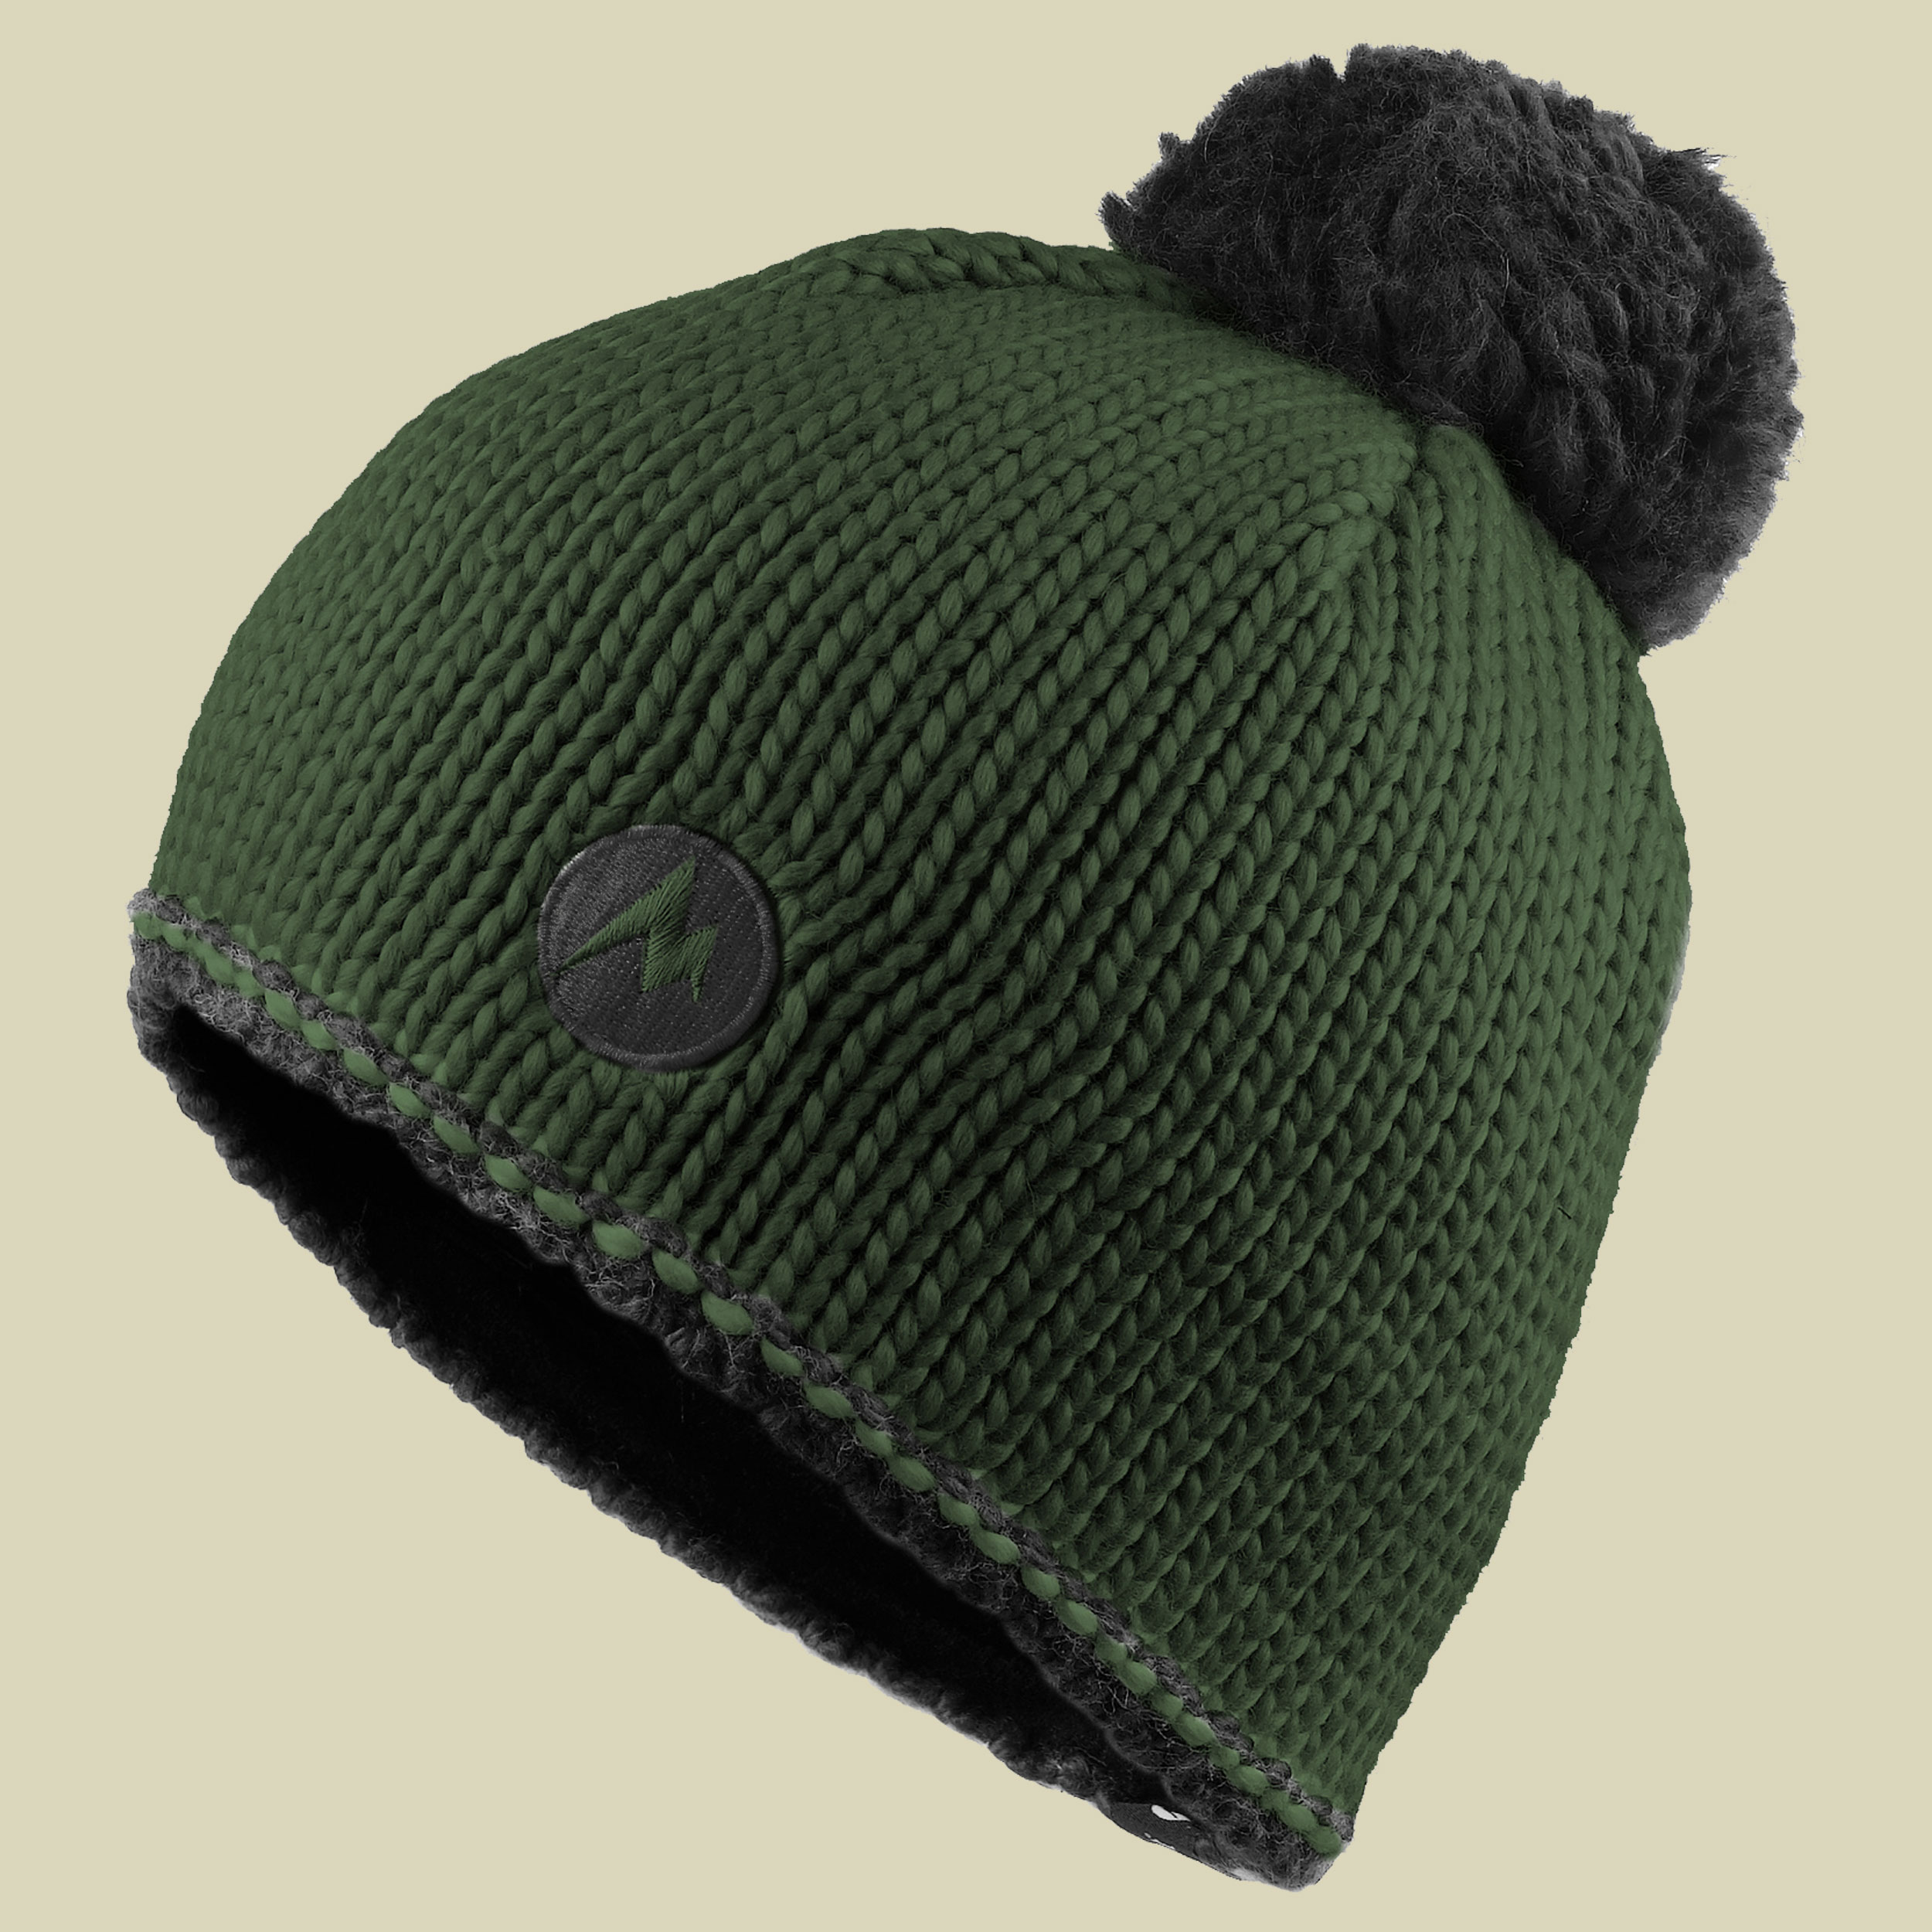 Dan Hat Größe one size Farbe green eny/bright berry